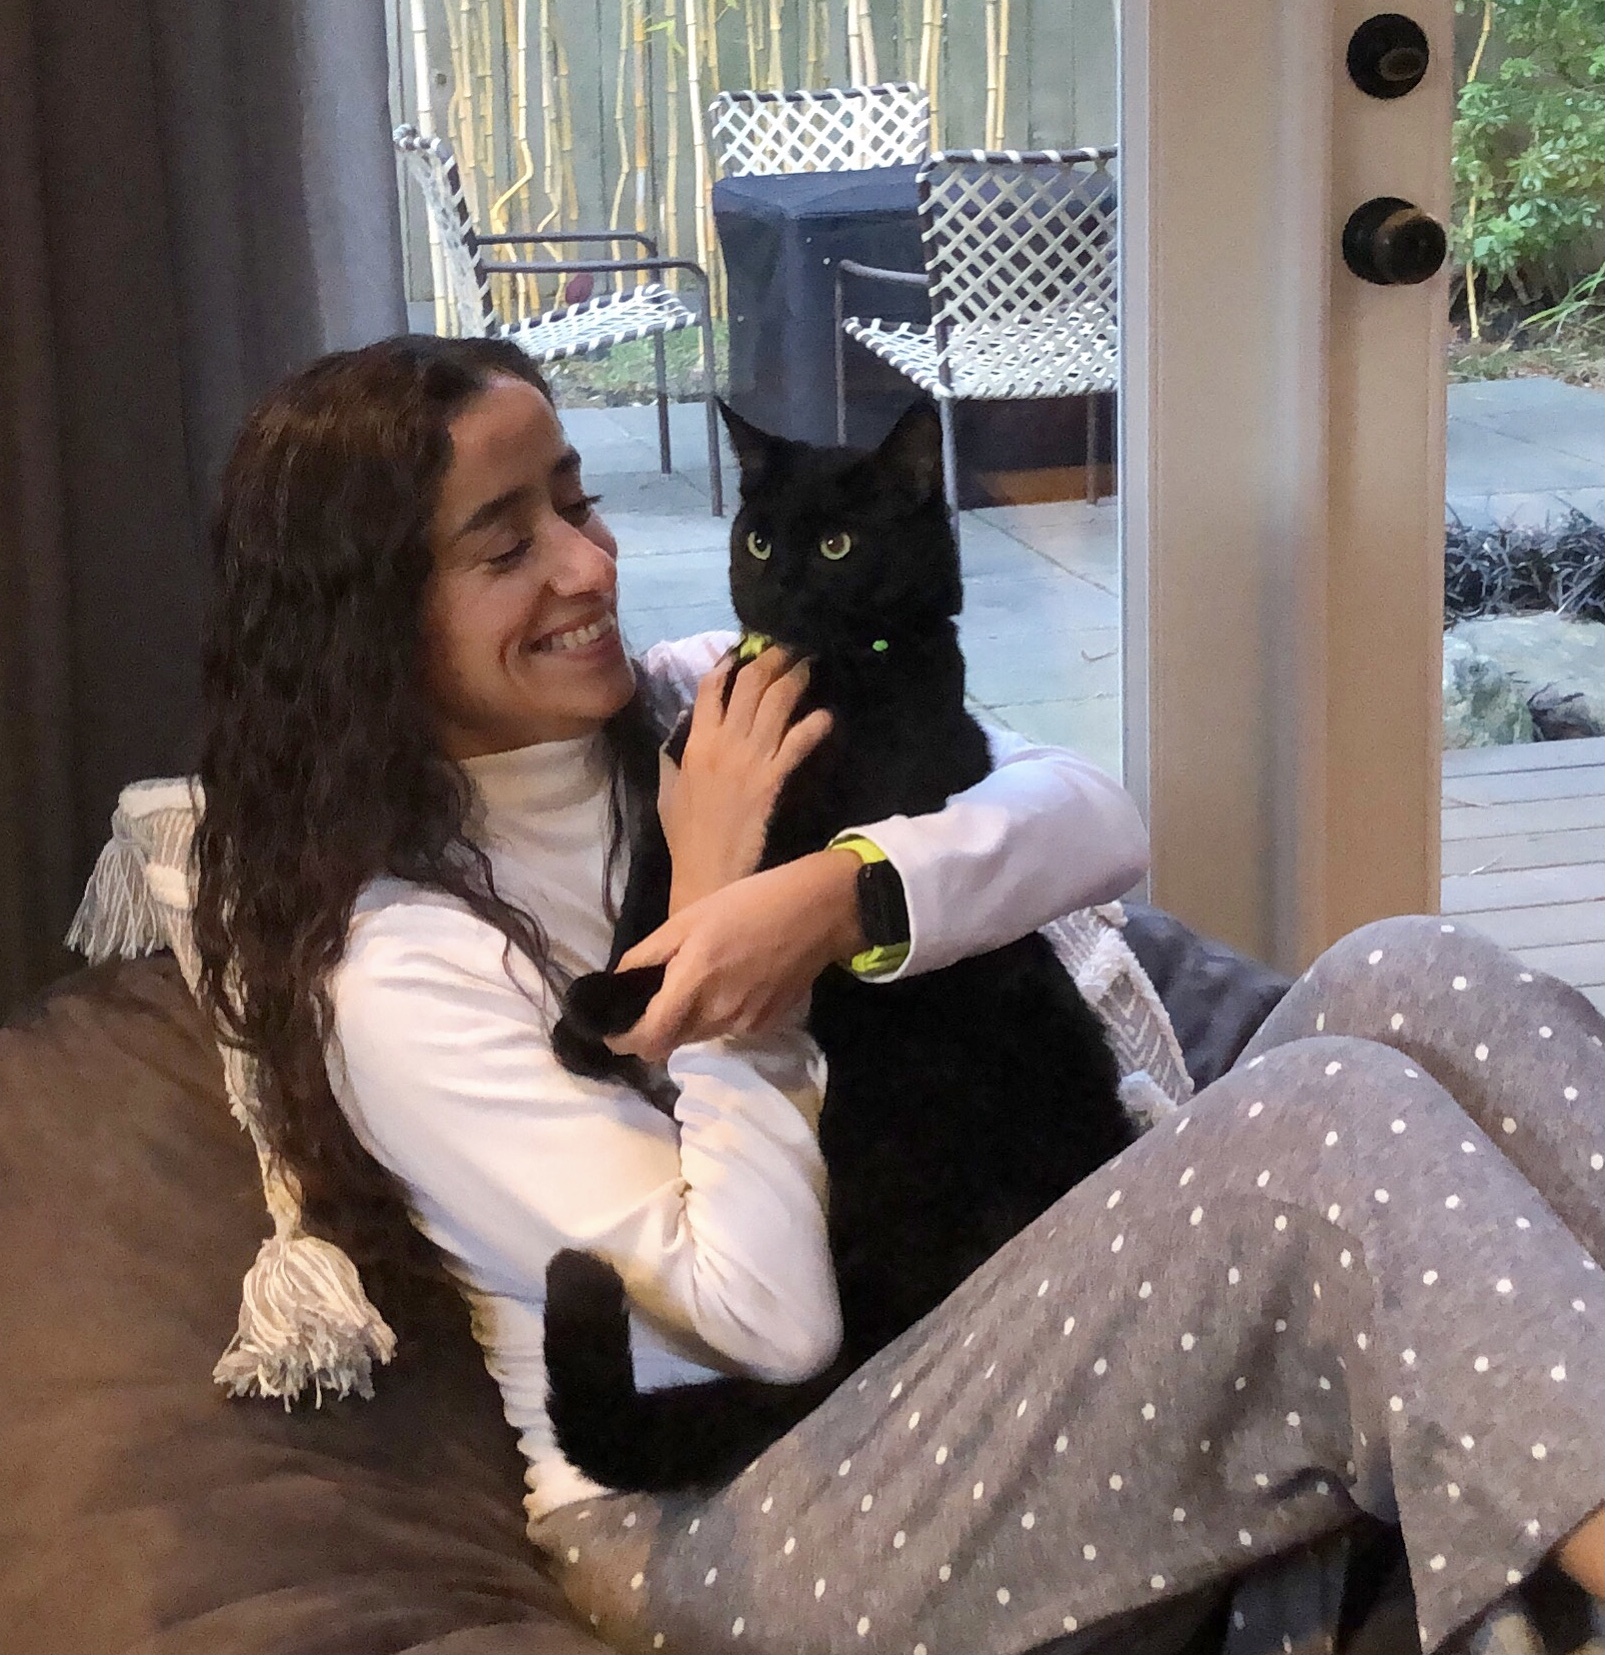 Dr. Wright with her cat, Barack